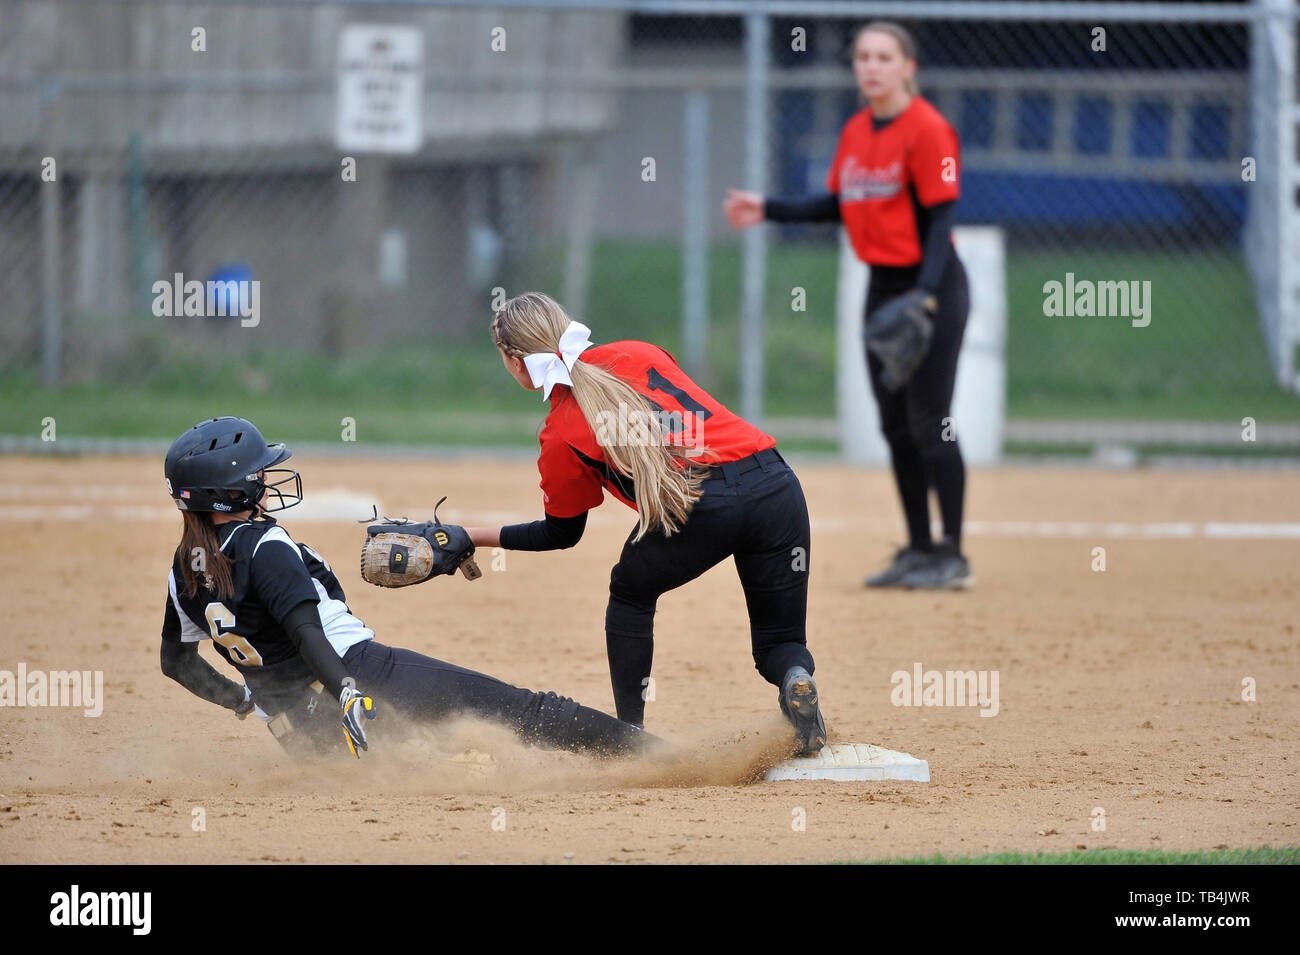 Runner being forced out at second base as opposing second baseman accepted a throw from the shortstop. USA. Stock Photo